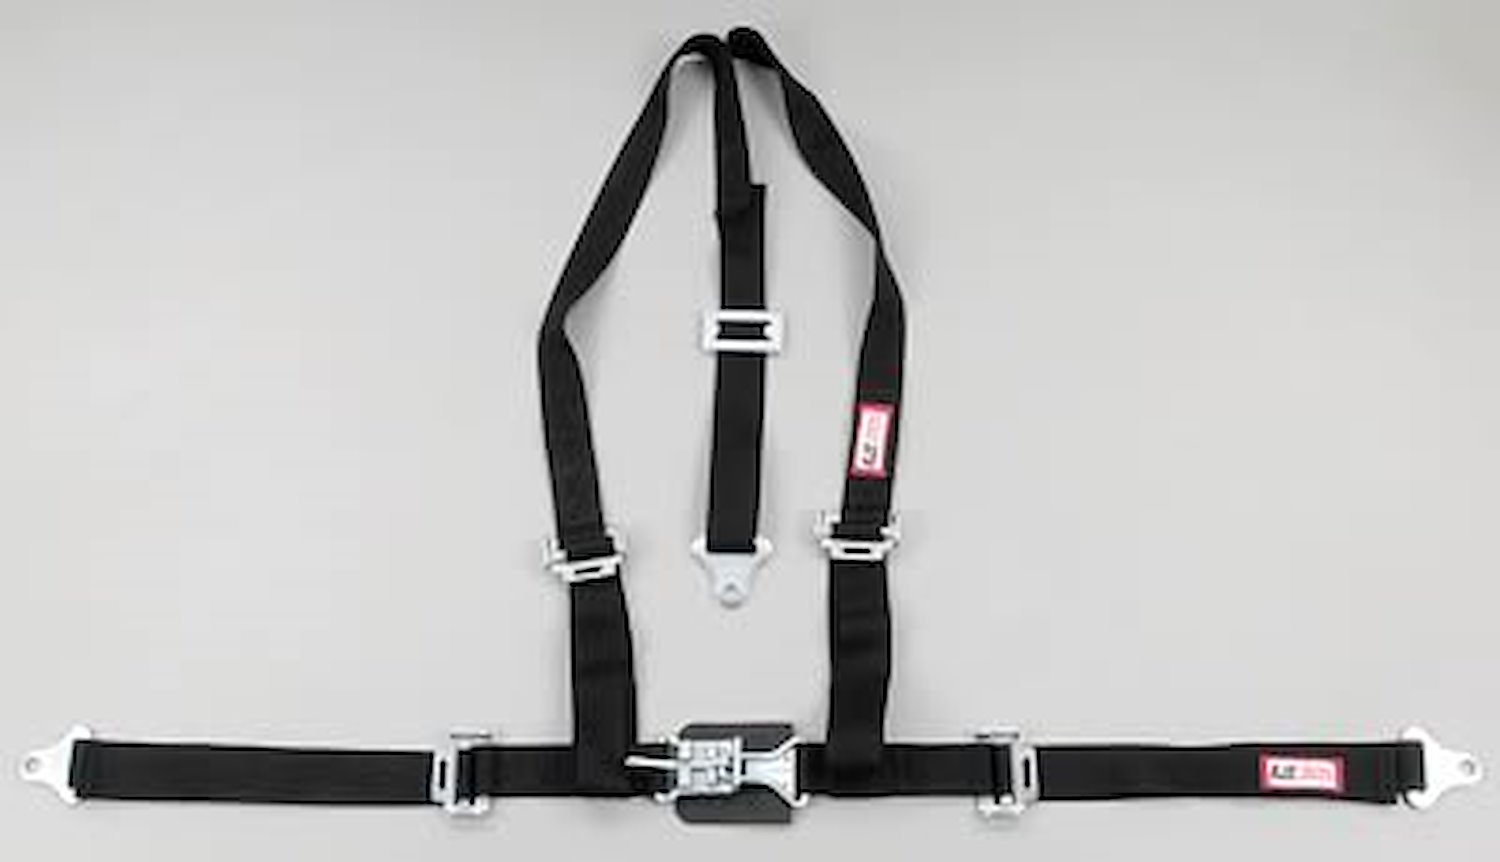 NON-SFI L&L HARNESS 3 PULL UP Lap Belt w/Adjuster SNAP 2 S.H. Y FLOOR Mount WRAP/SNAP GRAY